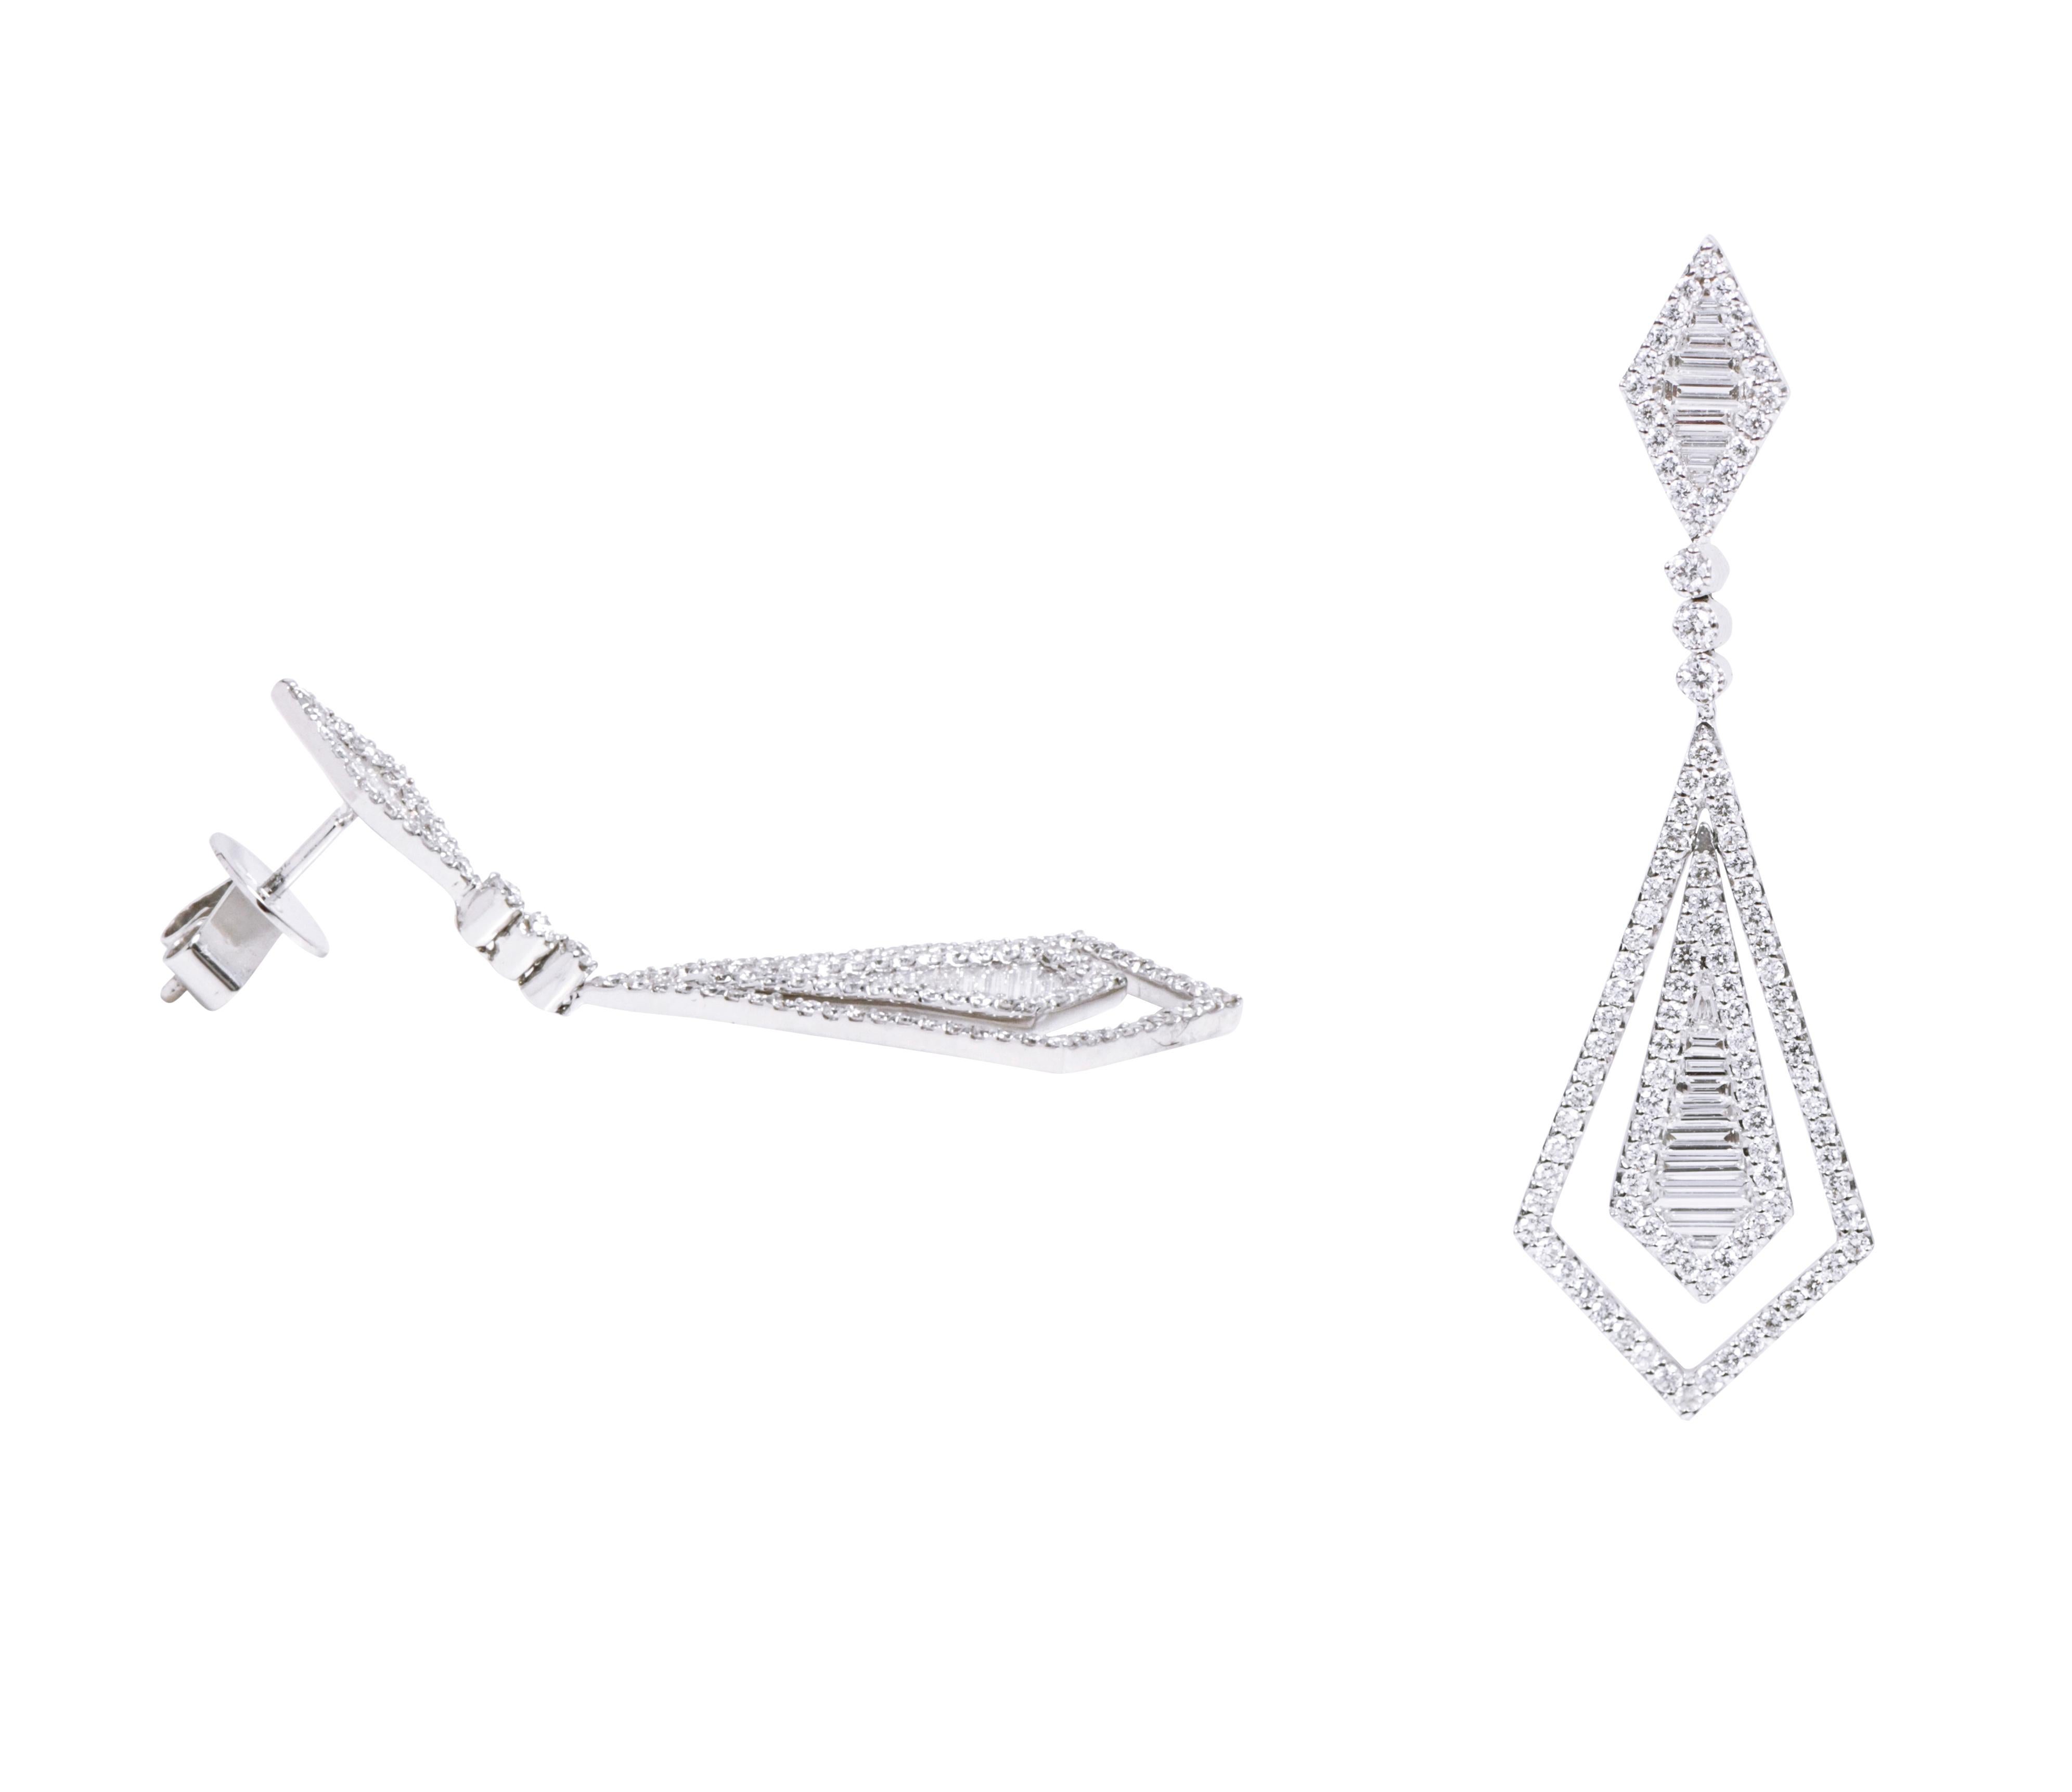 18 Karat White Gold 1.77 Carats Diamond Drop Earrings in Contemporary Style 

The glamourous earring has a really unique design making it an excellent piece that can be enjoyed often. The earring is amicably formed with two quadrilateral shapes